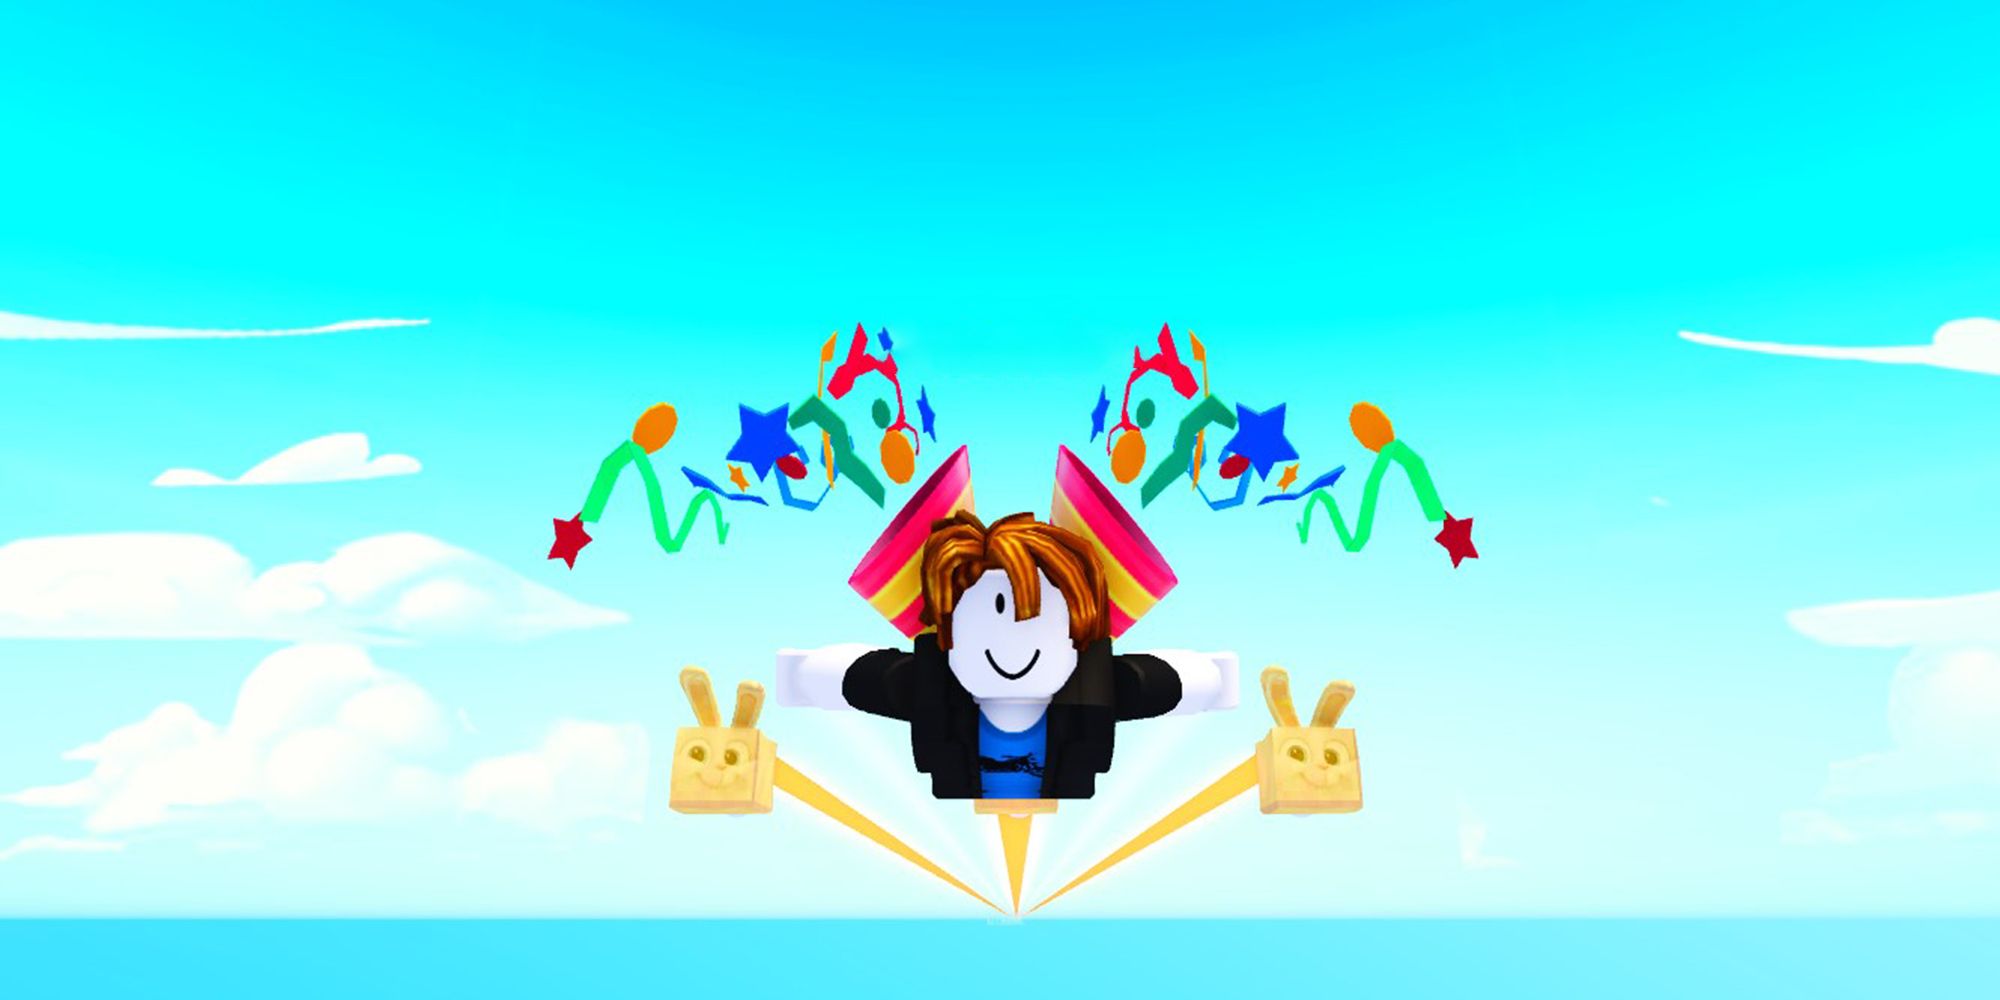 A Roblox character glides across the sky with his pet bunnies in Building Towers To Fly Farther.